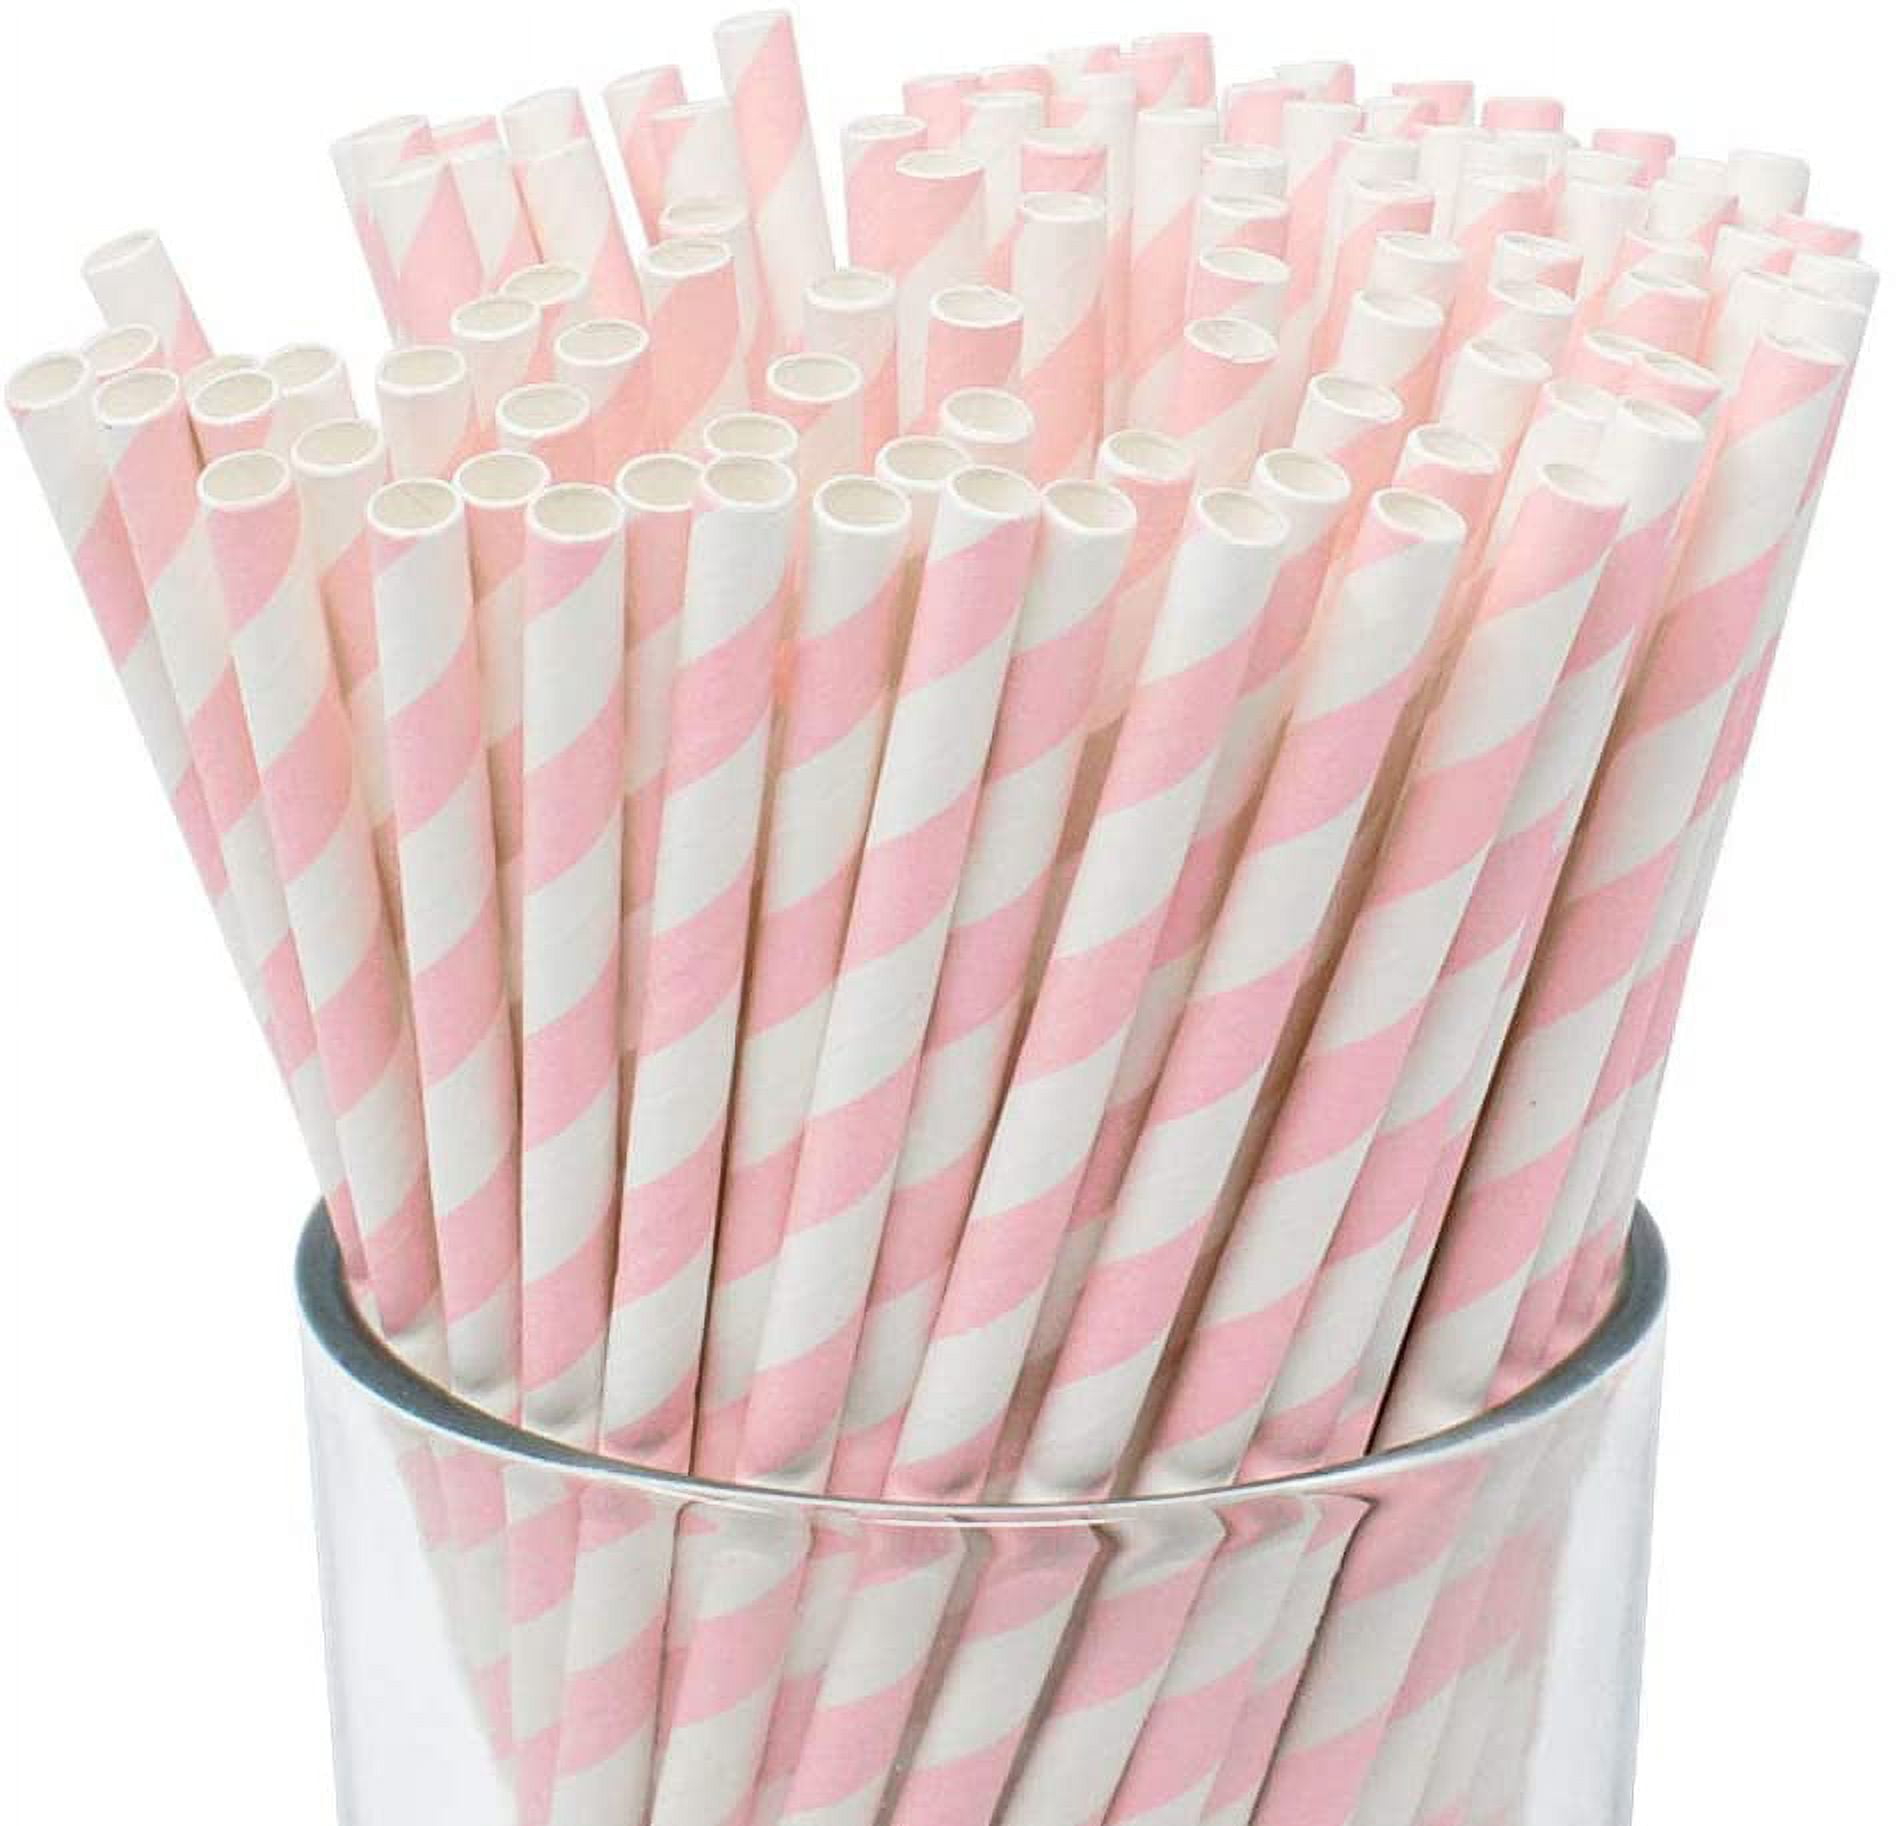 The best MOON 100pcs Heart Shaped Pink Straws Disposable Drinking Cute Straw  Individually Wrapped Pink Plastic Straw Valentines day Cocktail Birthday  Party Bridal Shower Wedding Supplies Pink 100